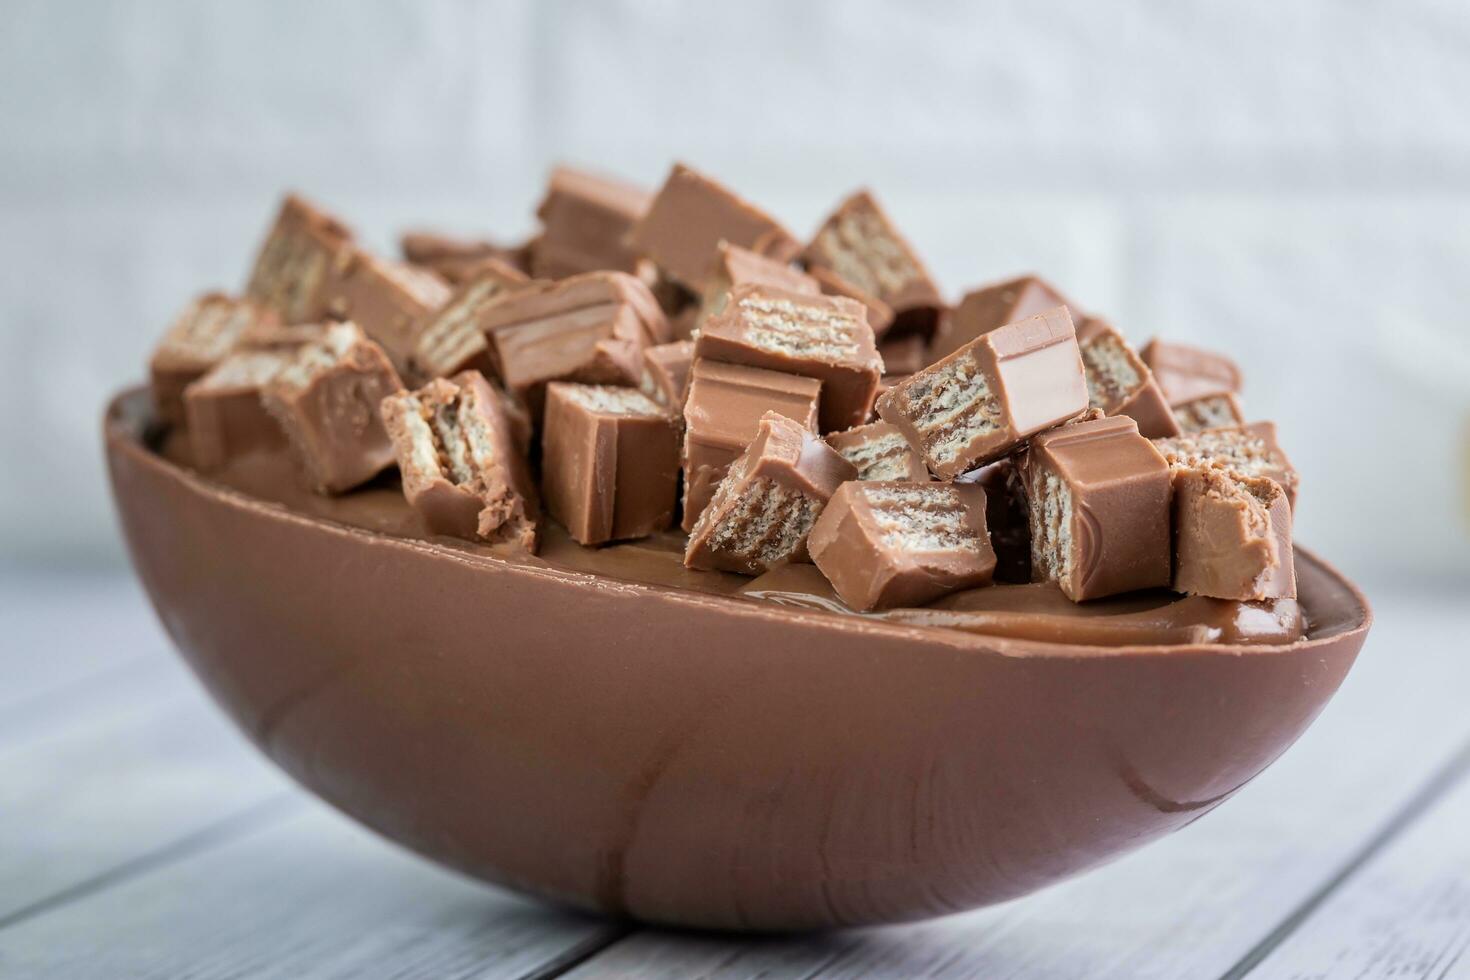 Chocolate candies in bowl on white wooden table, closeup photo